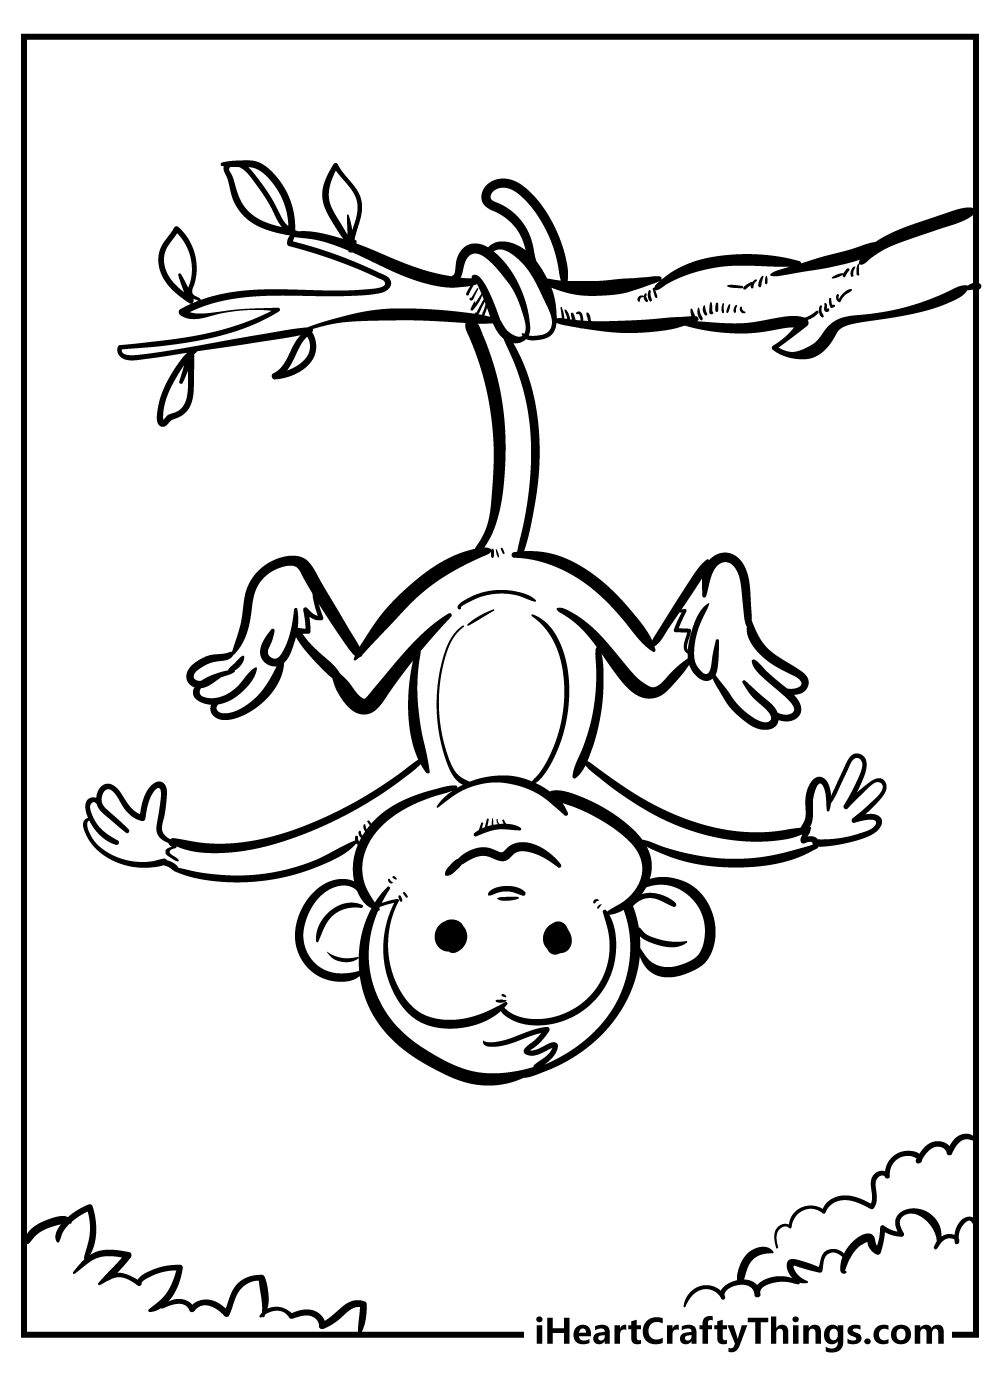 Monkey coloring pages free printables